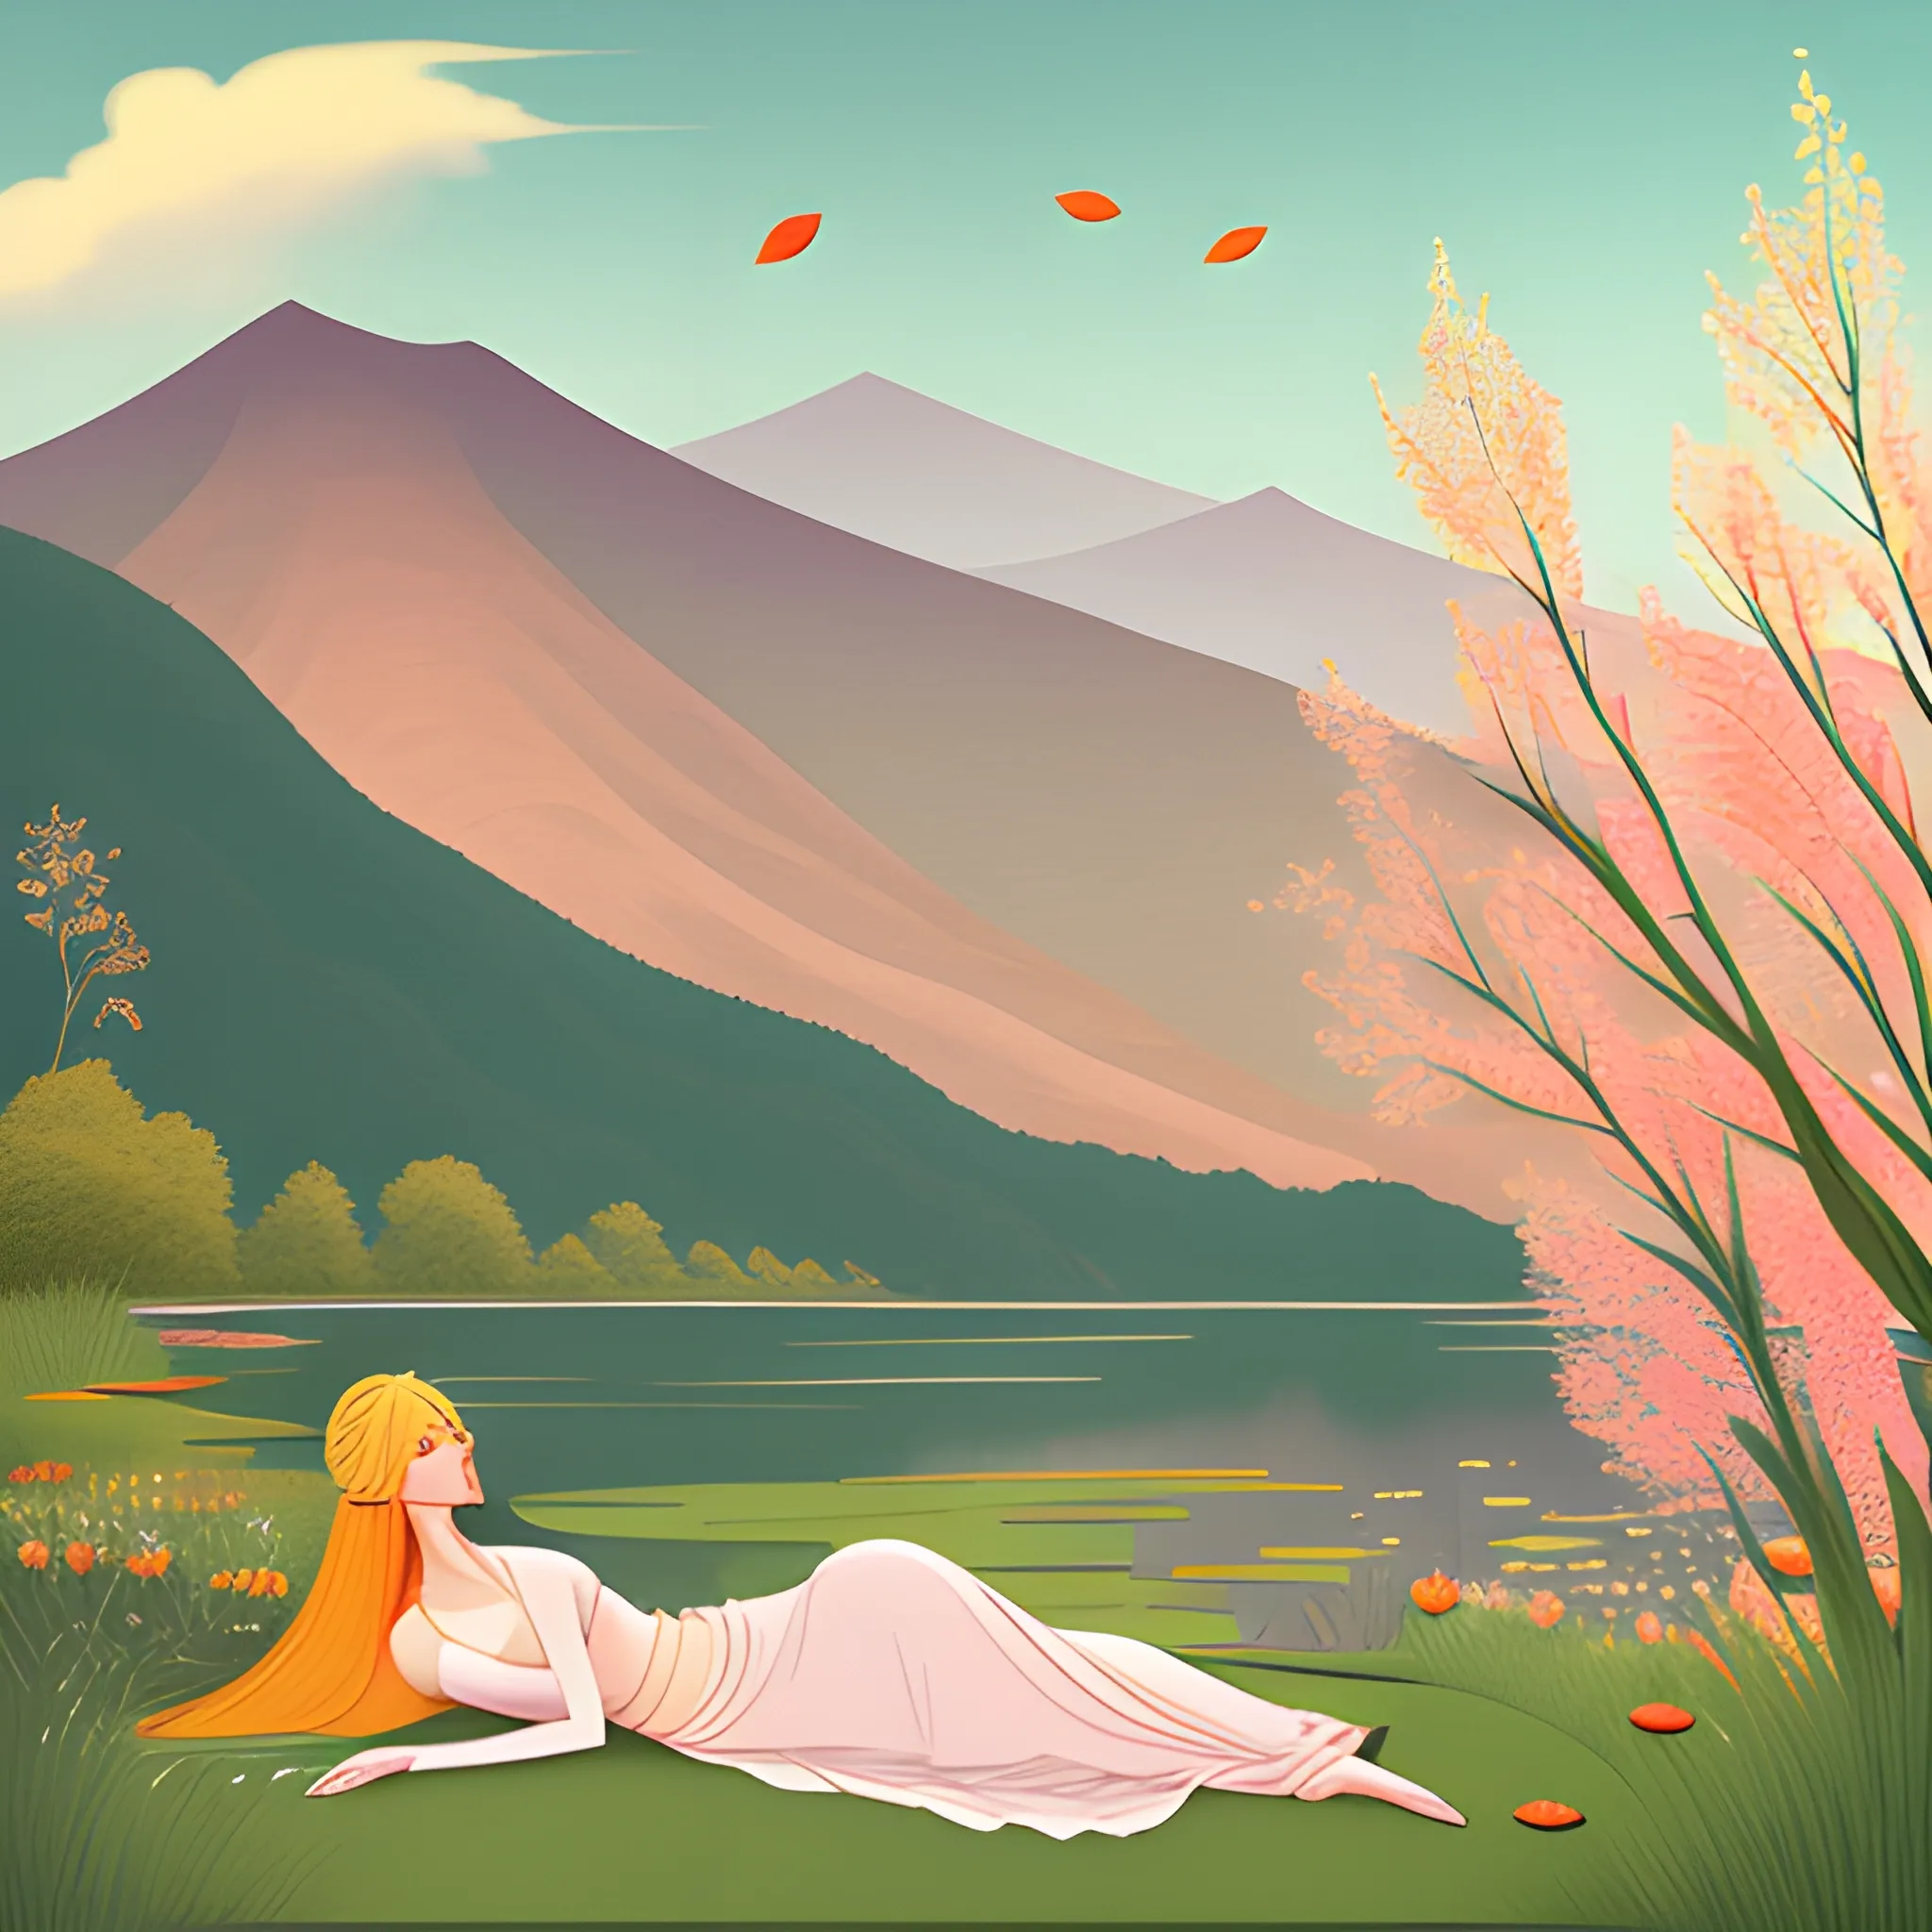 By the lakeside, a young girl lies on soft green grass, beside her, a fully bloomed pink lotus, her golden hair gently caressed by a mild breeze. It's a soft and serene scene with warm hues, hazy lighting, reminiscent of an autumn mountain landscape in the style of Qing Shan's illustrations.